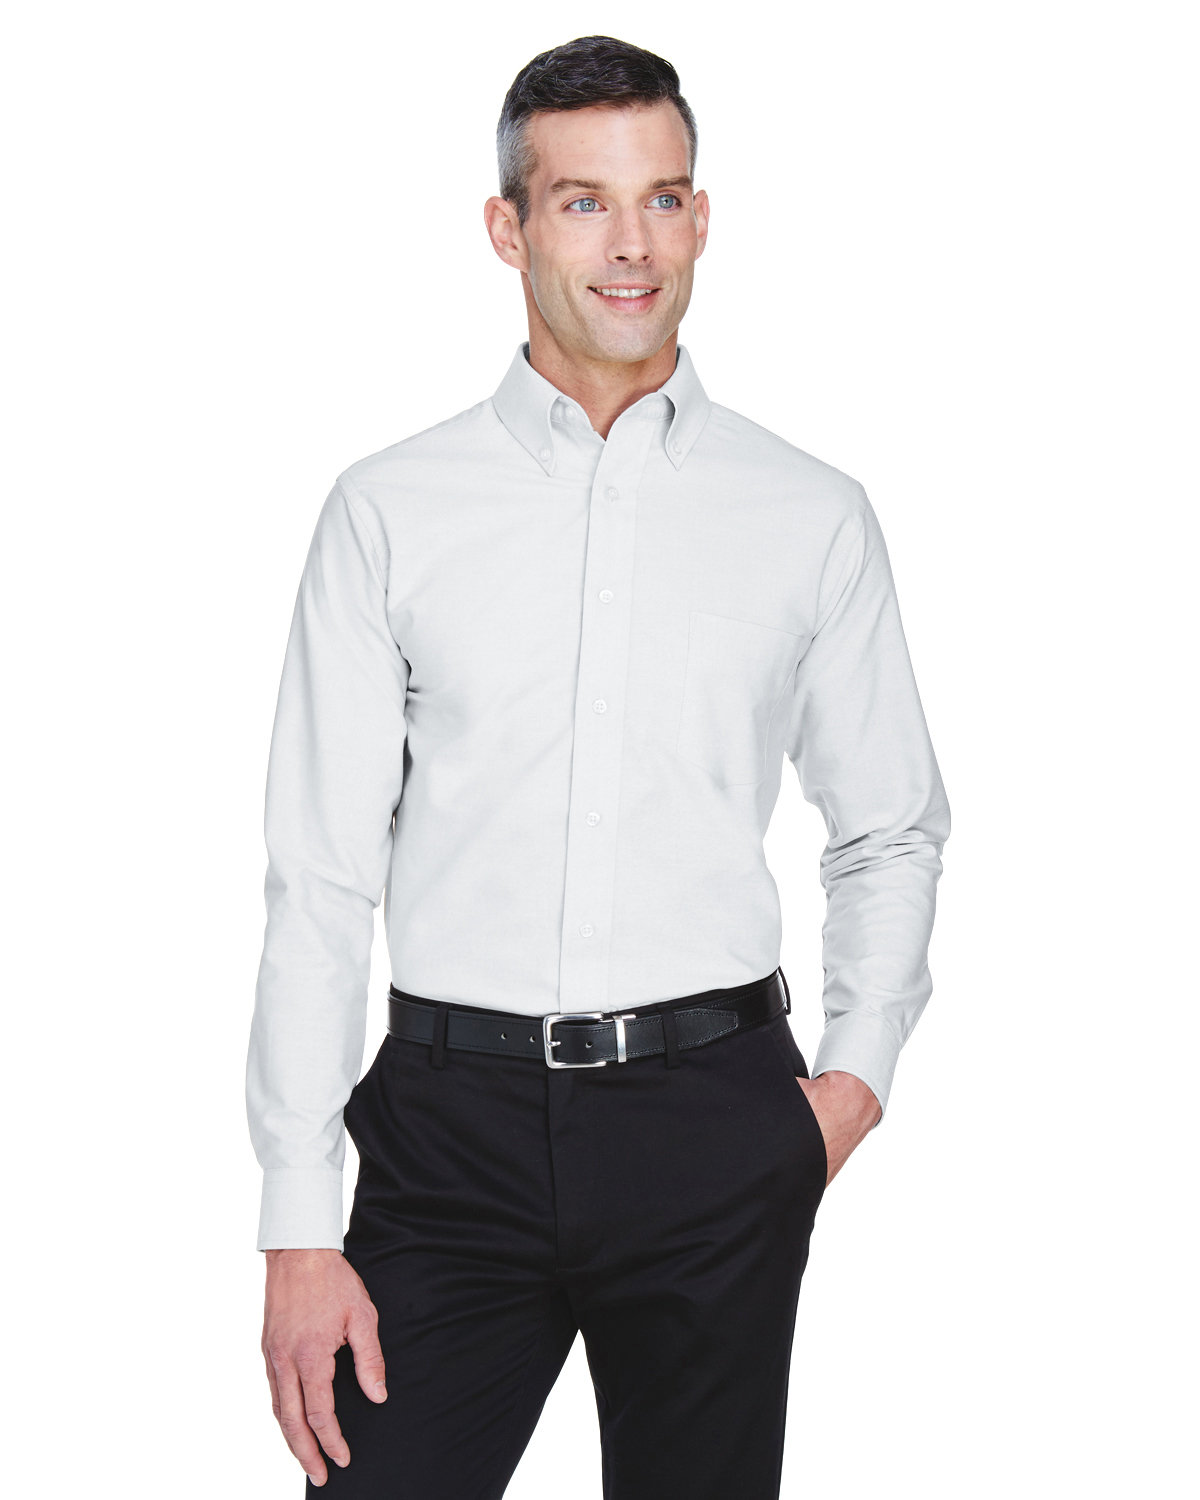 UltraClub Men's Classic Wrinkle-Resistant Long-Sleeve Oxford WHITE 